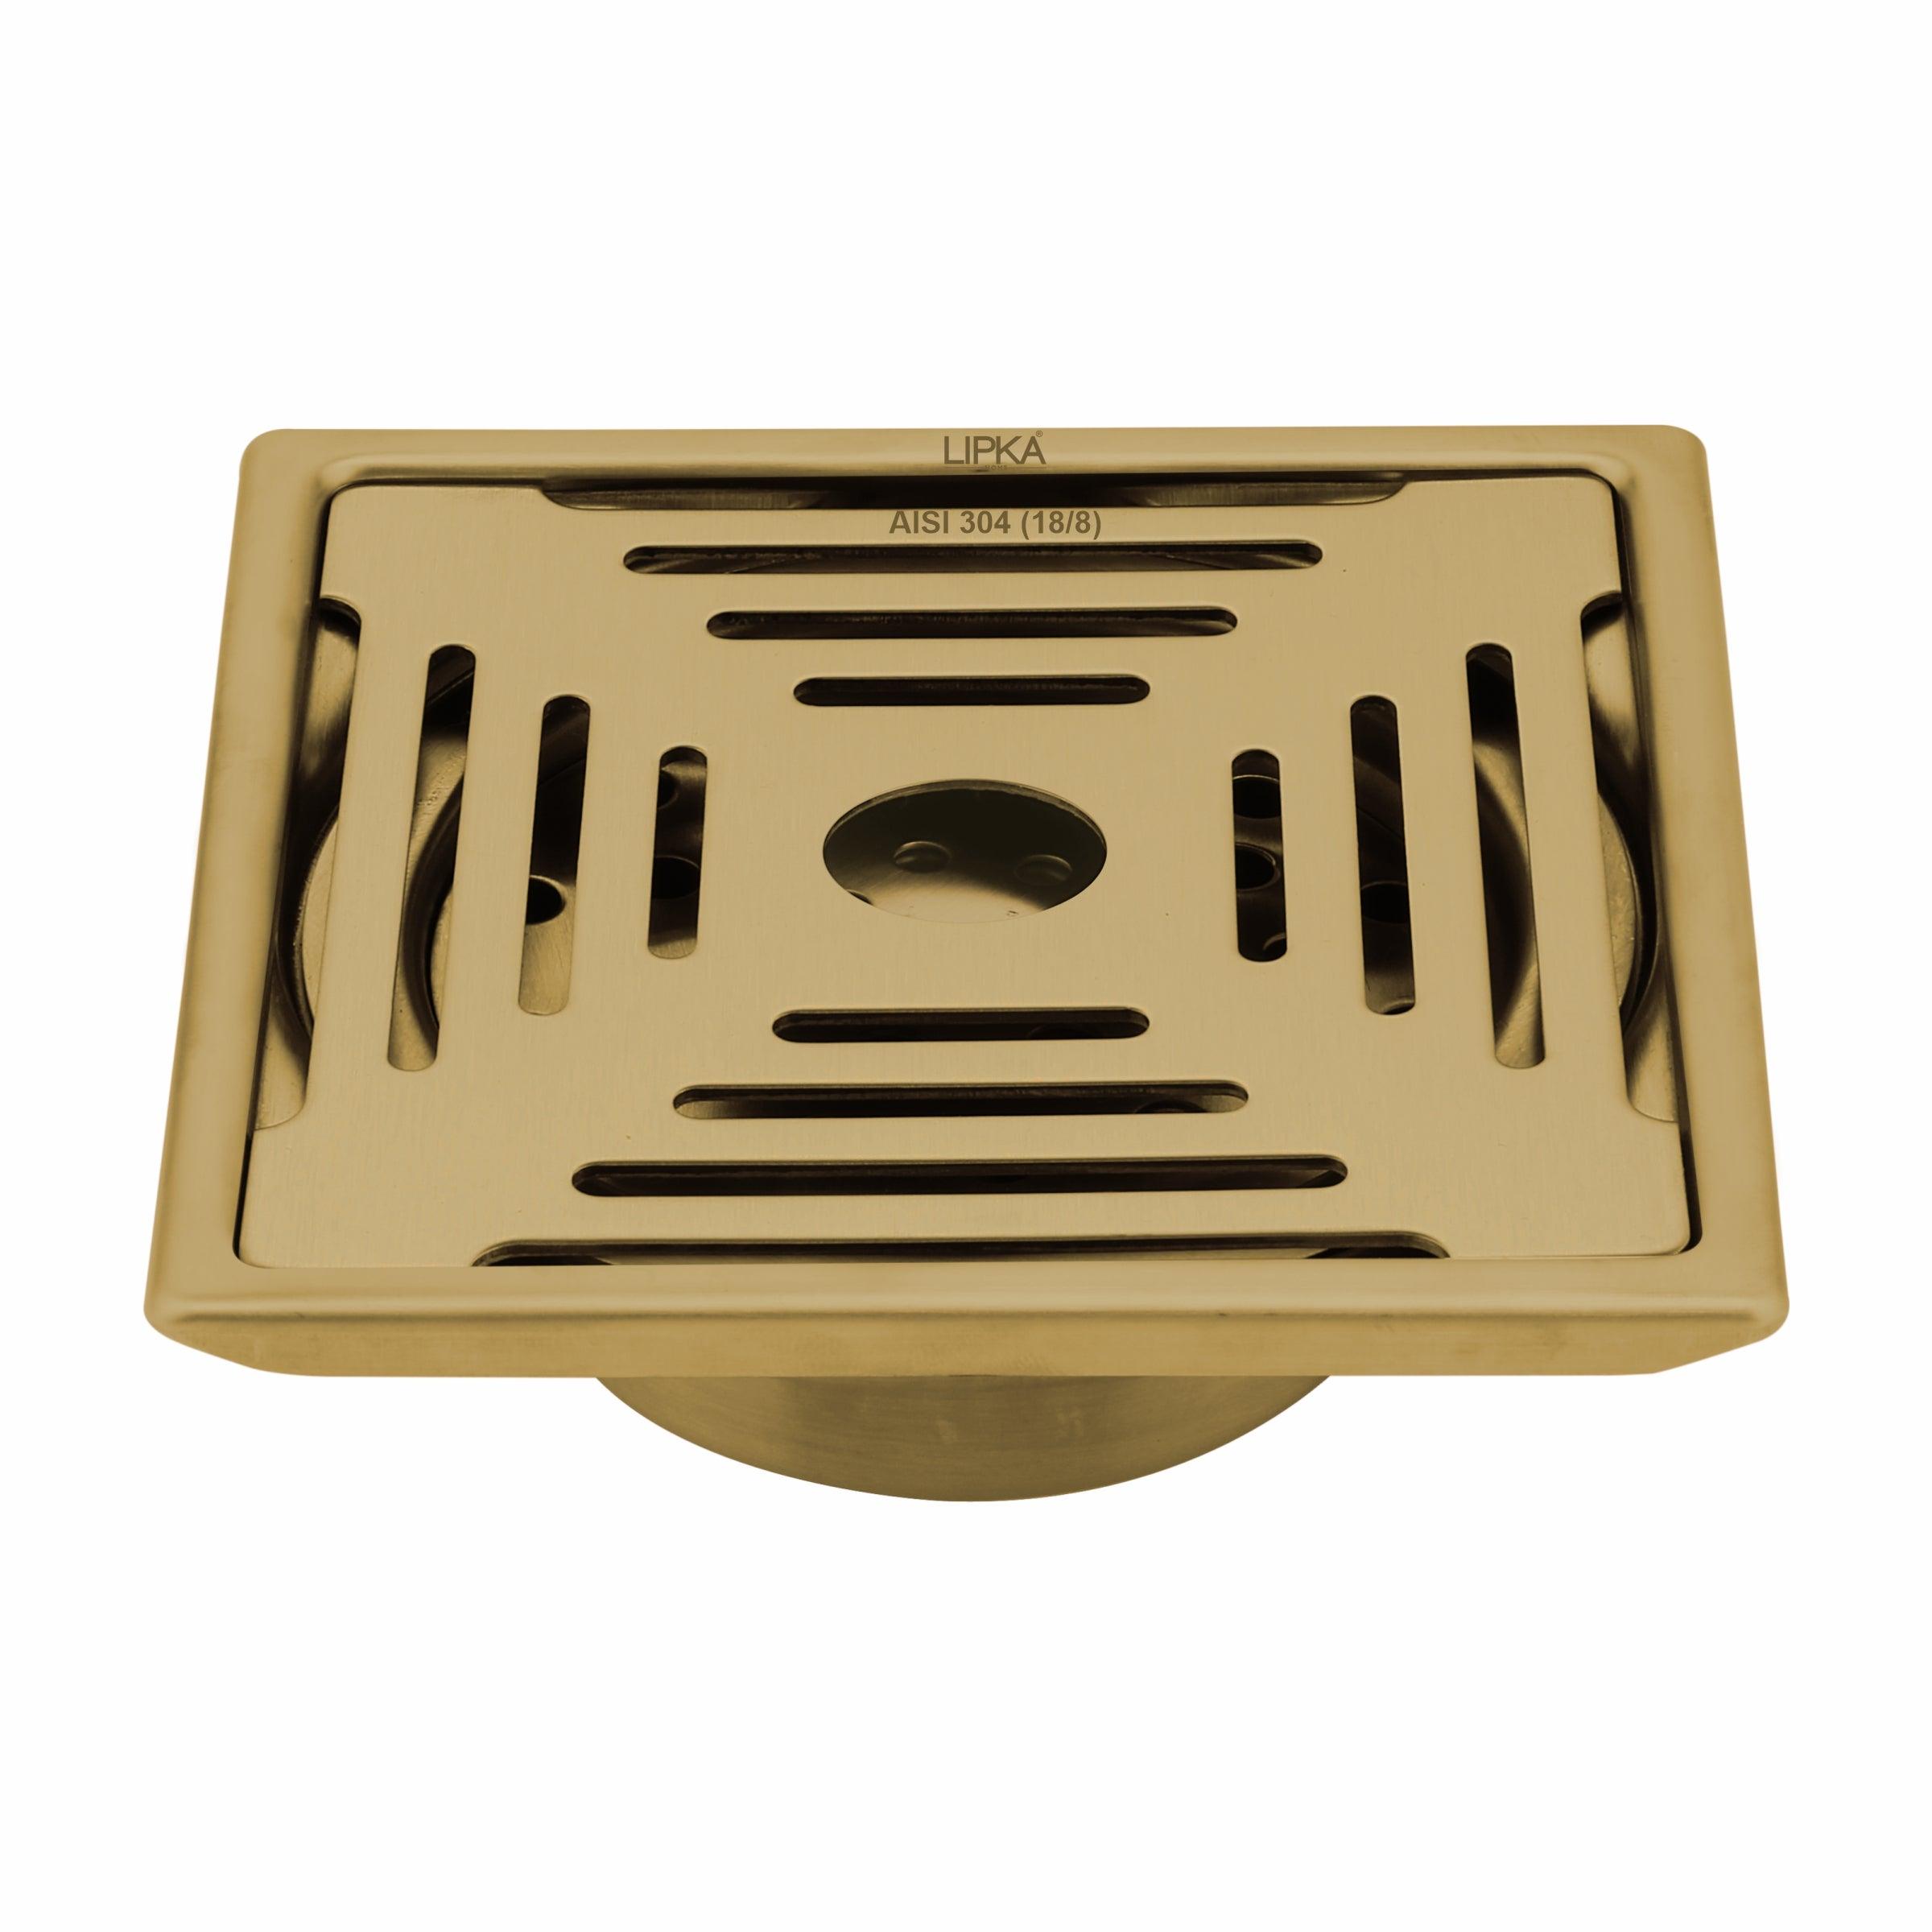 Green Exclusive Square Floor Drain in Yellow Gold PVD Coating (6 x 6 Inches) with Hole & Cockroach Trap - LIPKA